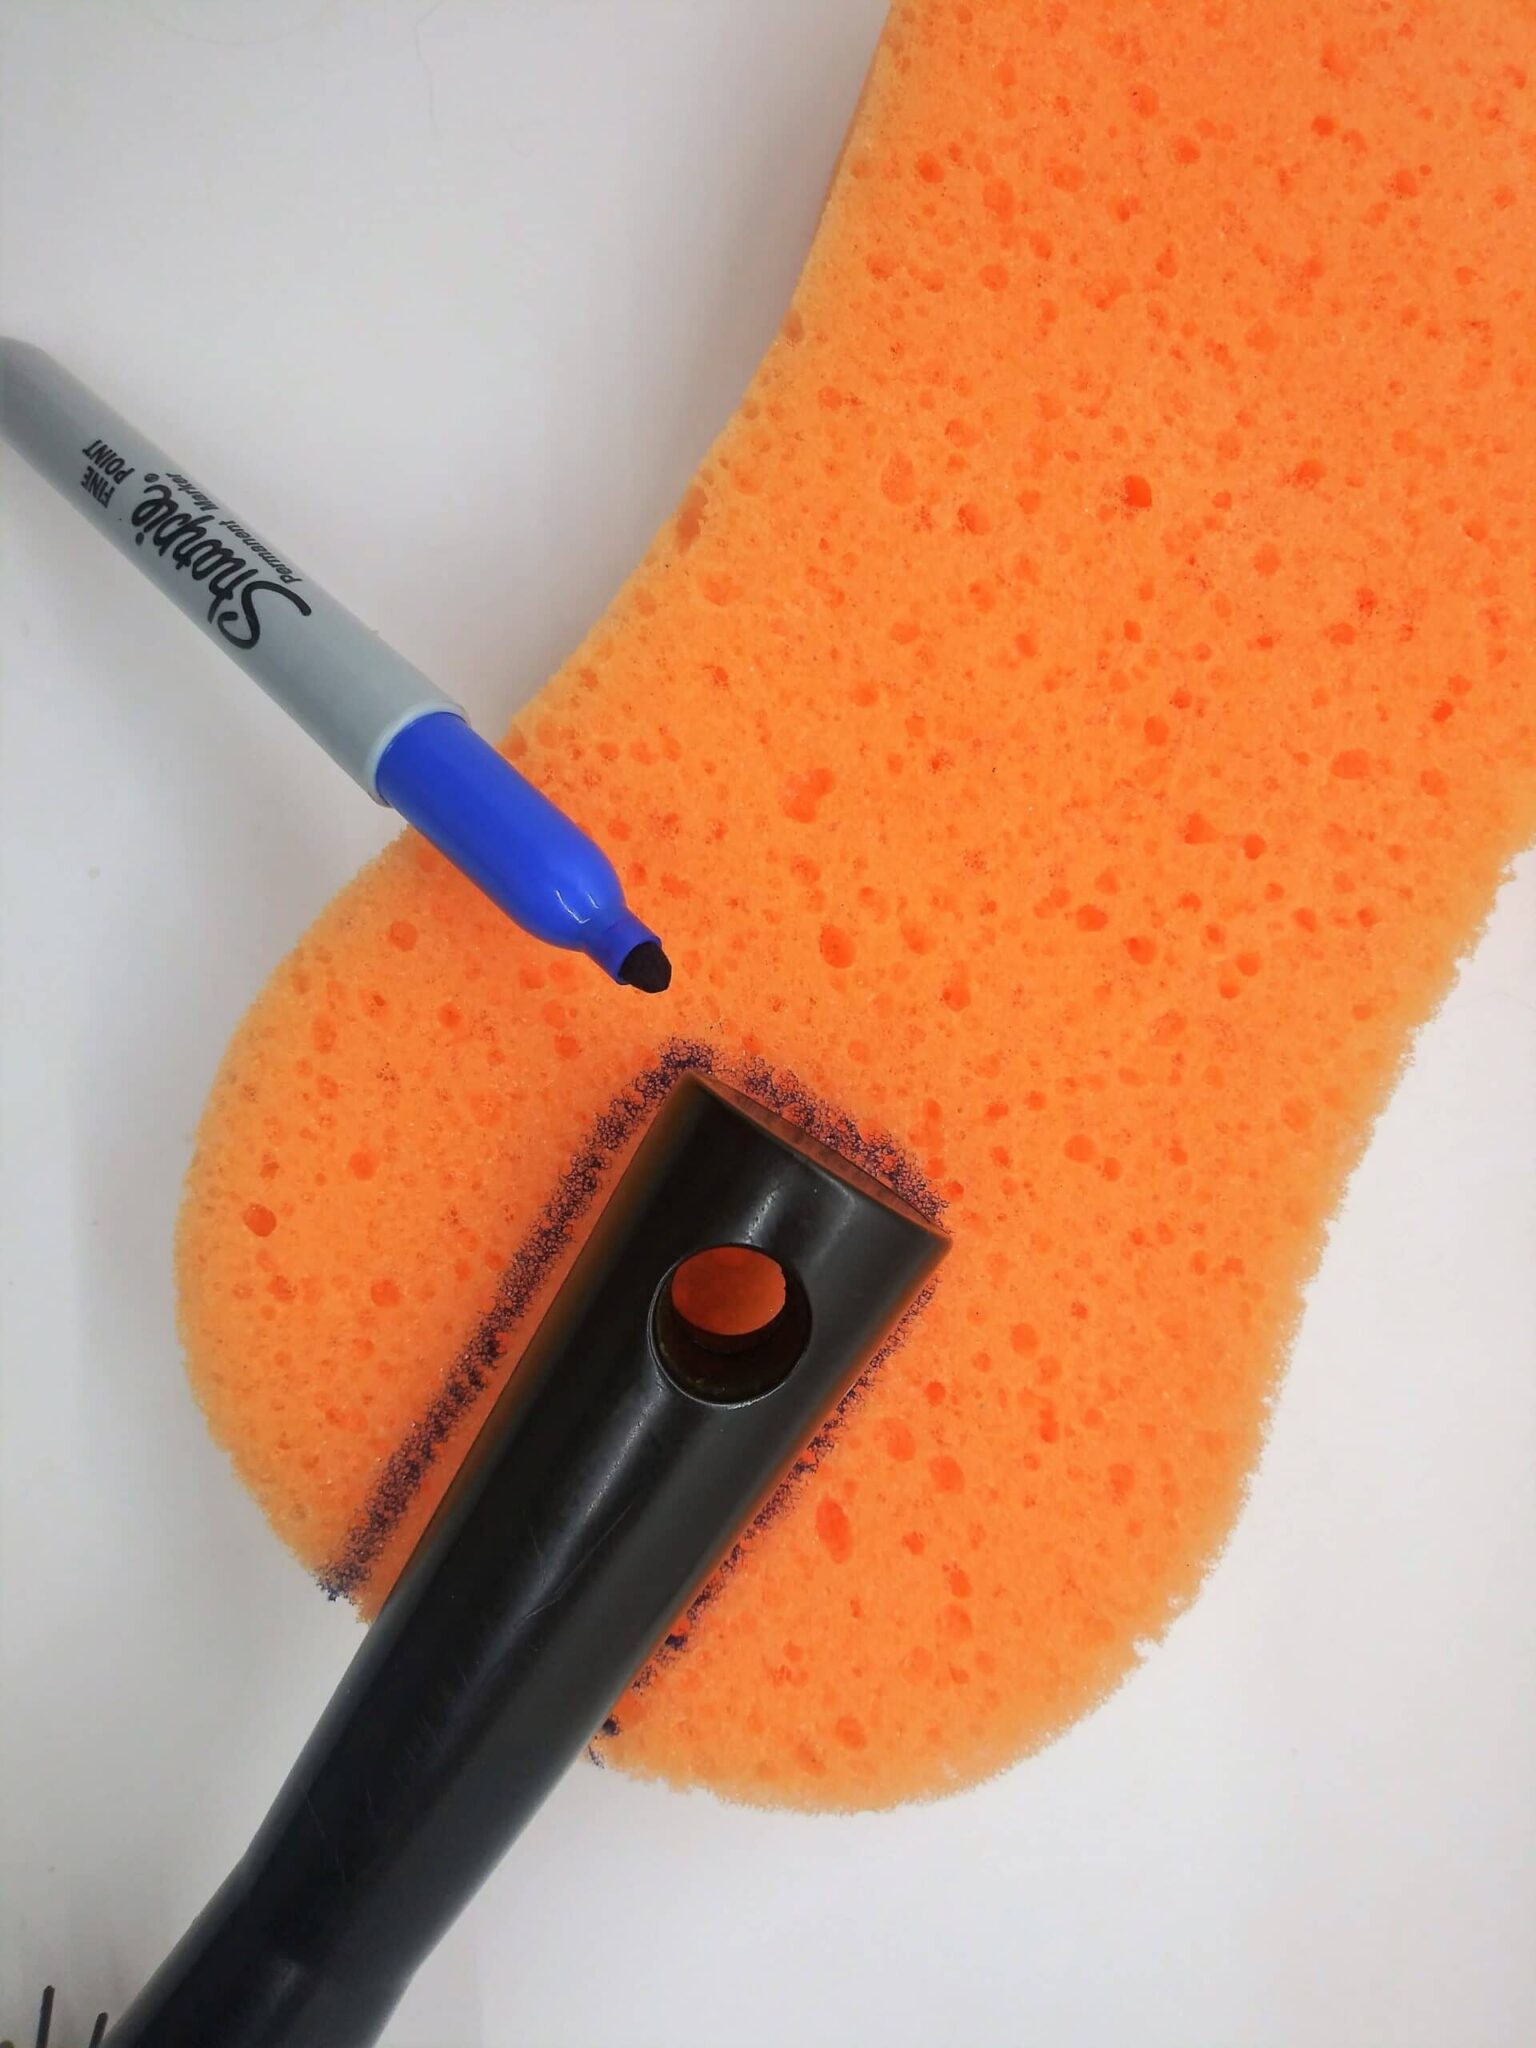 DIY anal sex toys hairbrush, step 2 photo of a hairbrush handle being traced onto a sponge